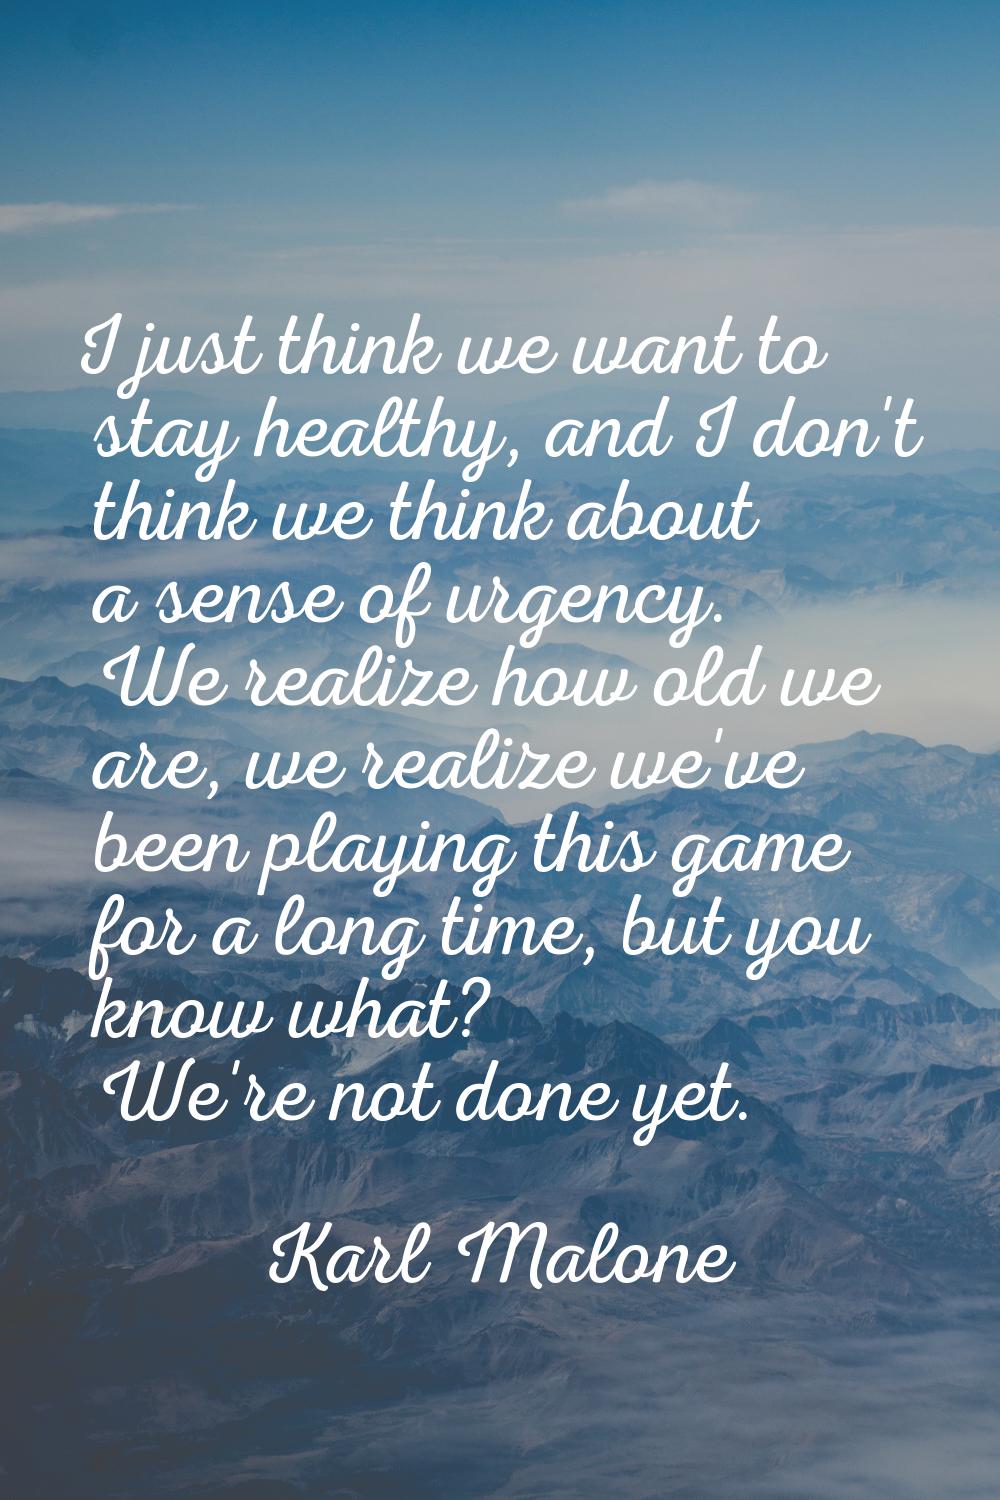 I just think we want to stay healthy, and I don't think we think about a sense of urgency. We reali